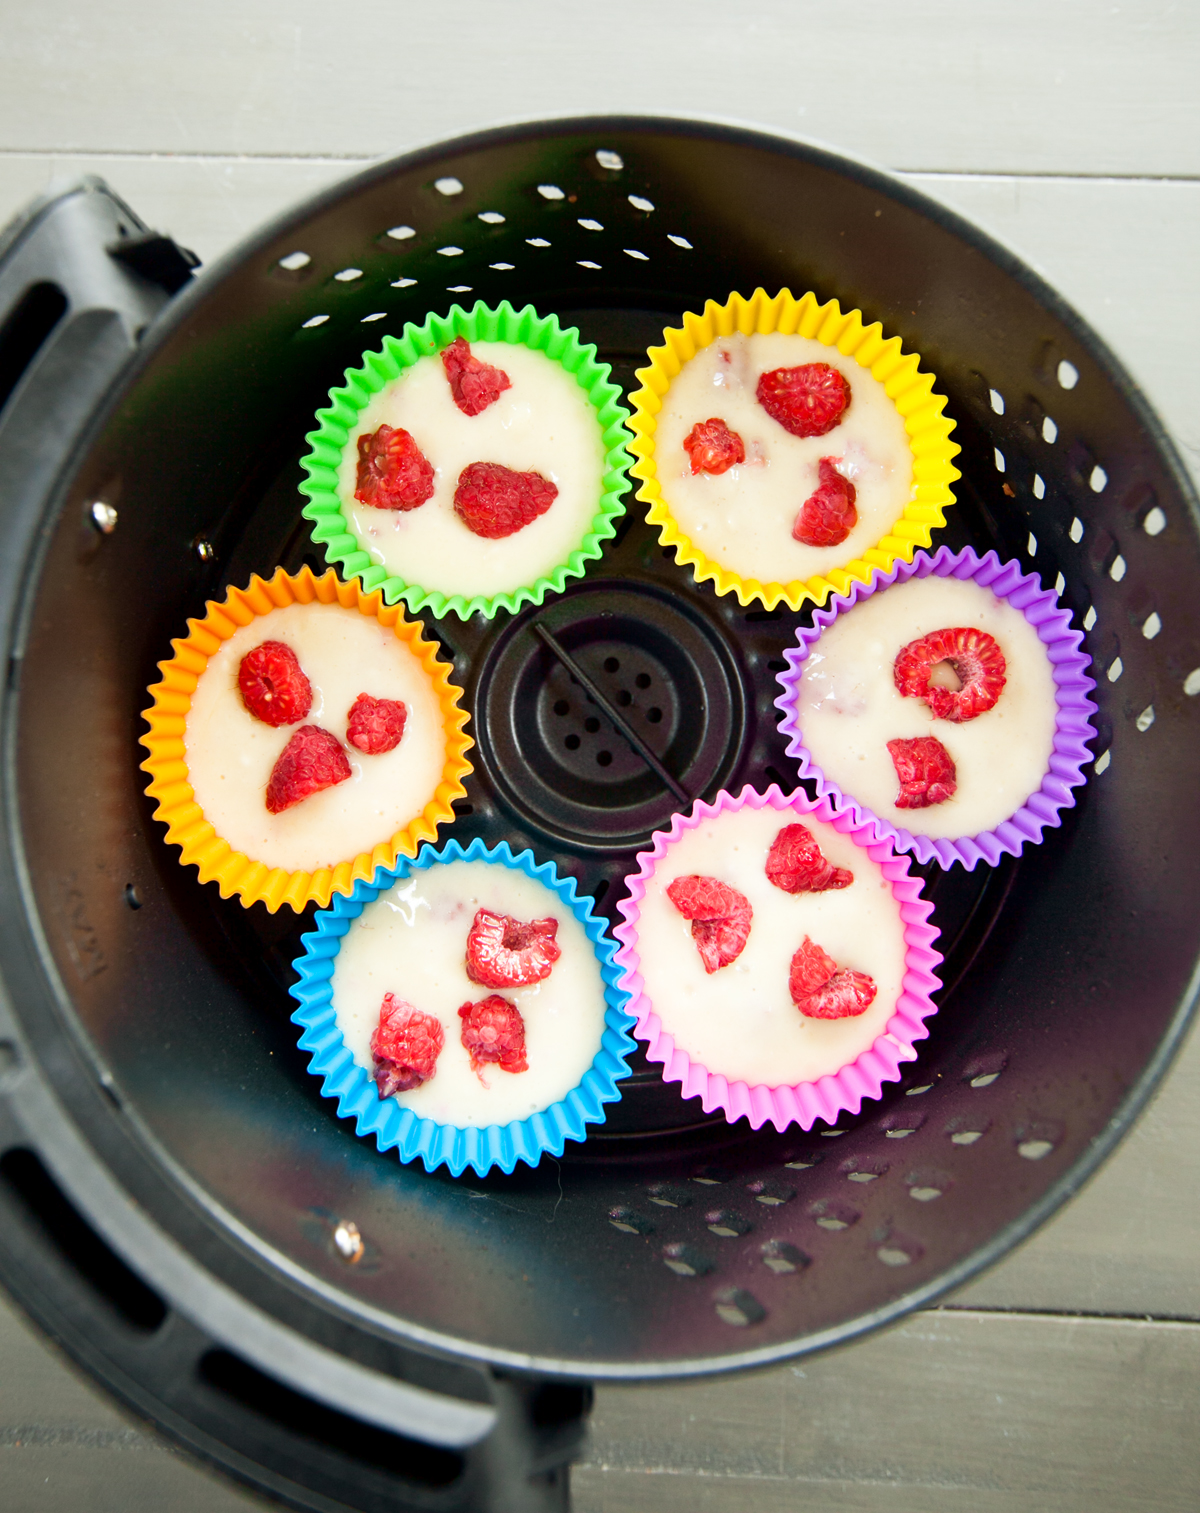 An overhead view of an air fryer basket with rainbow colored silicone baking cups filled with raspberry muffin batter.